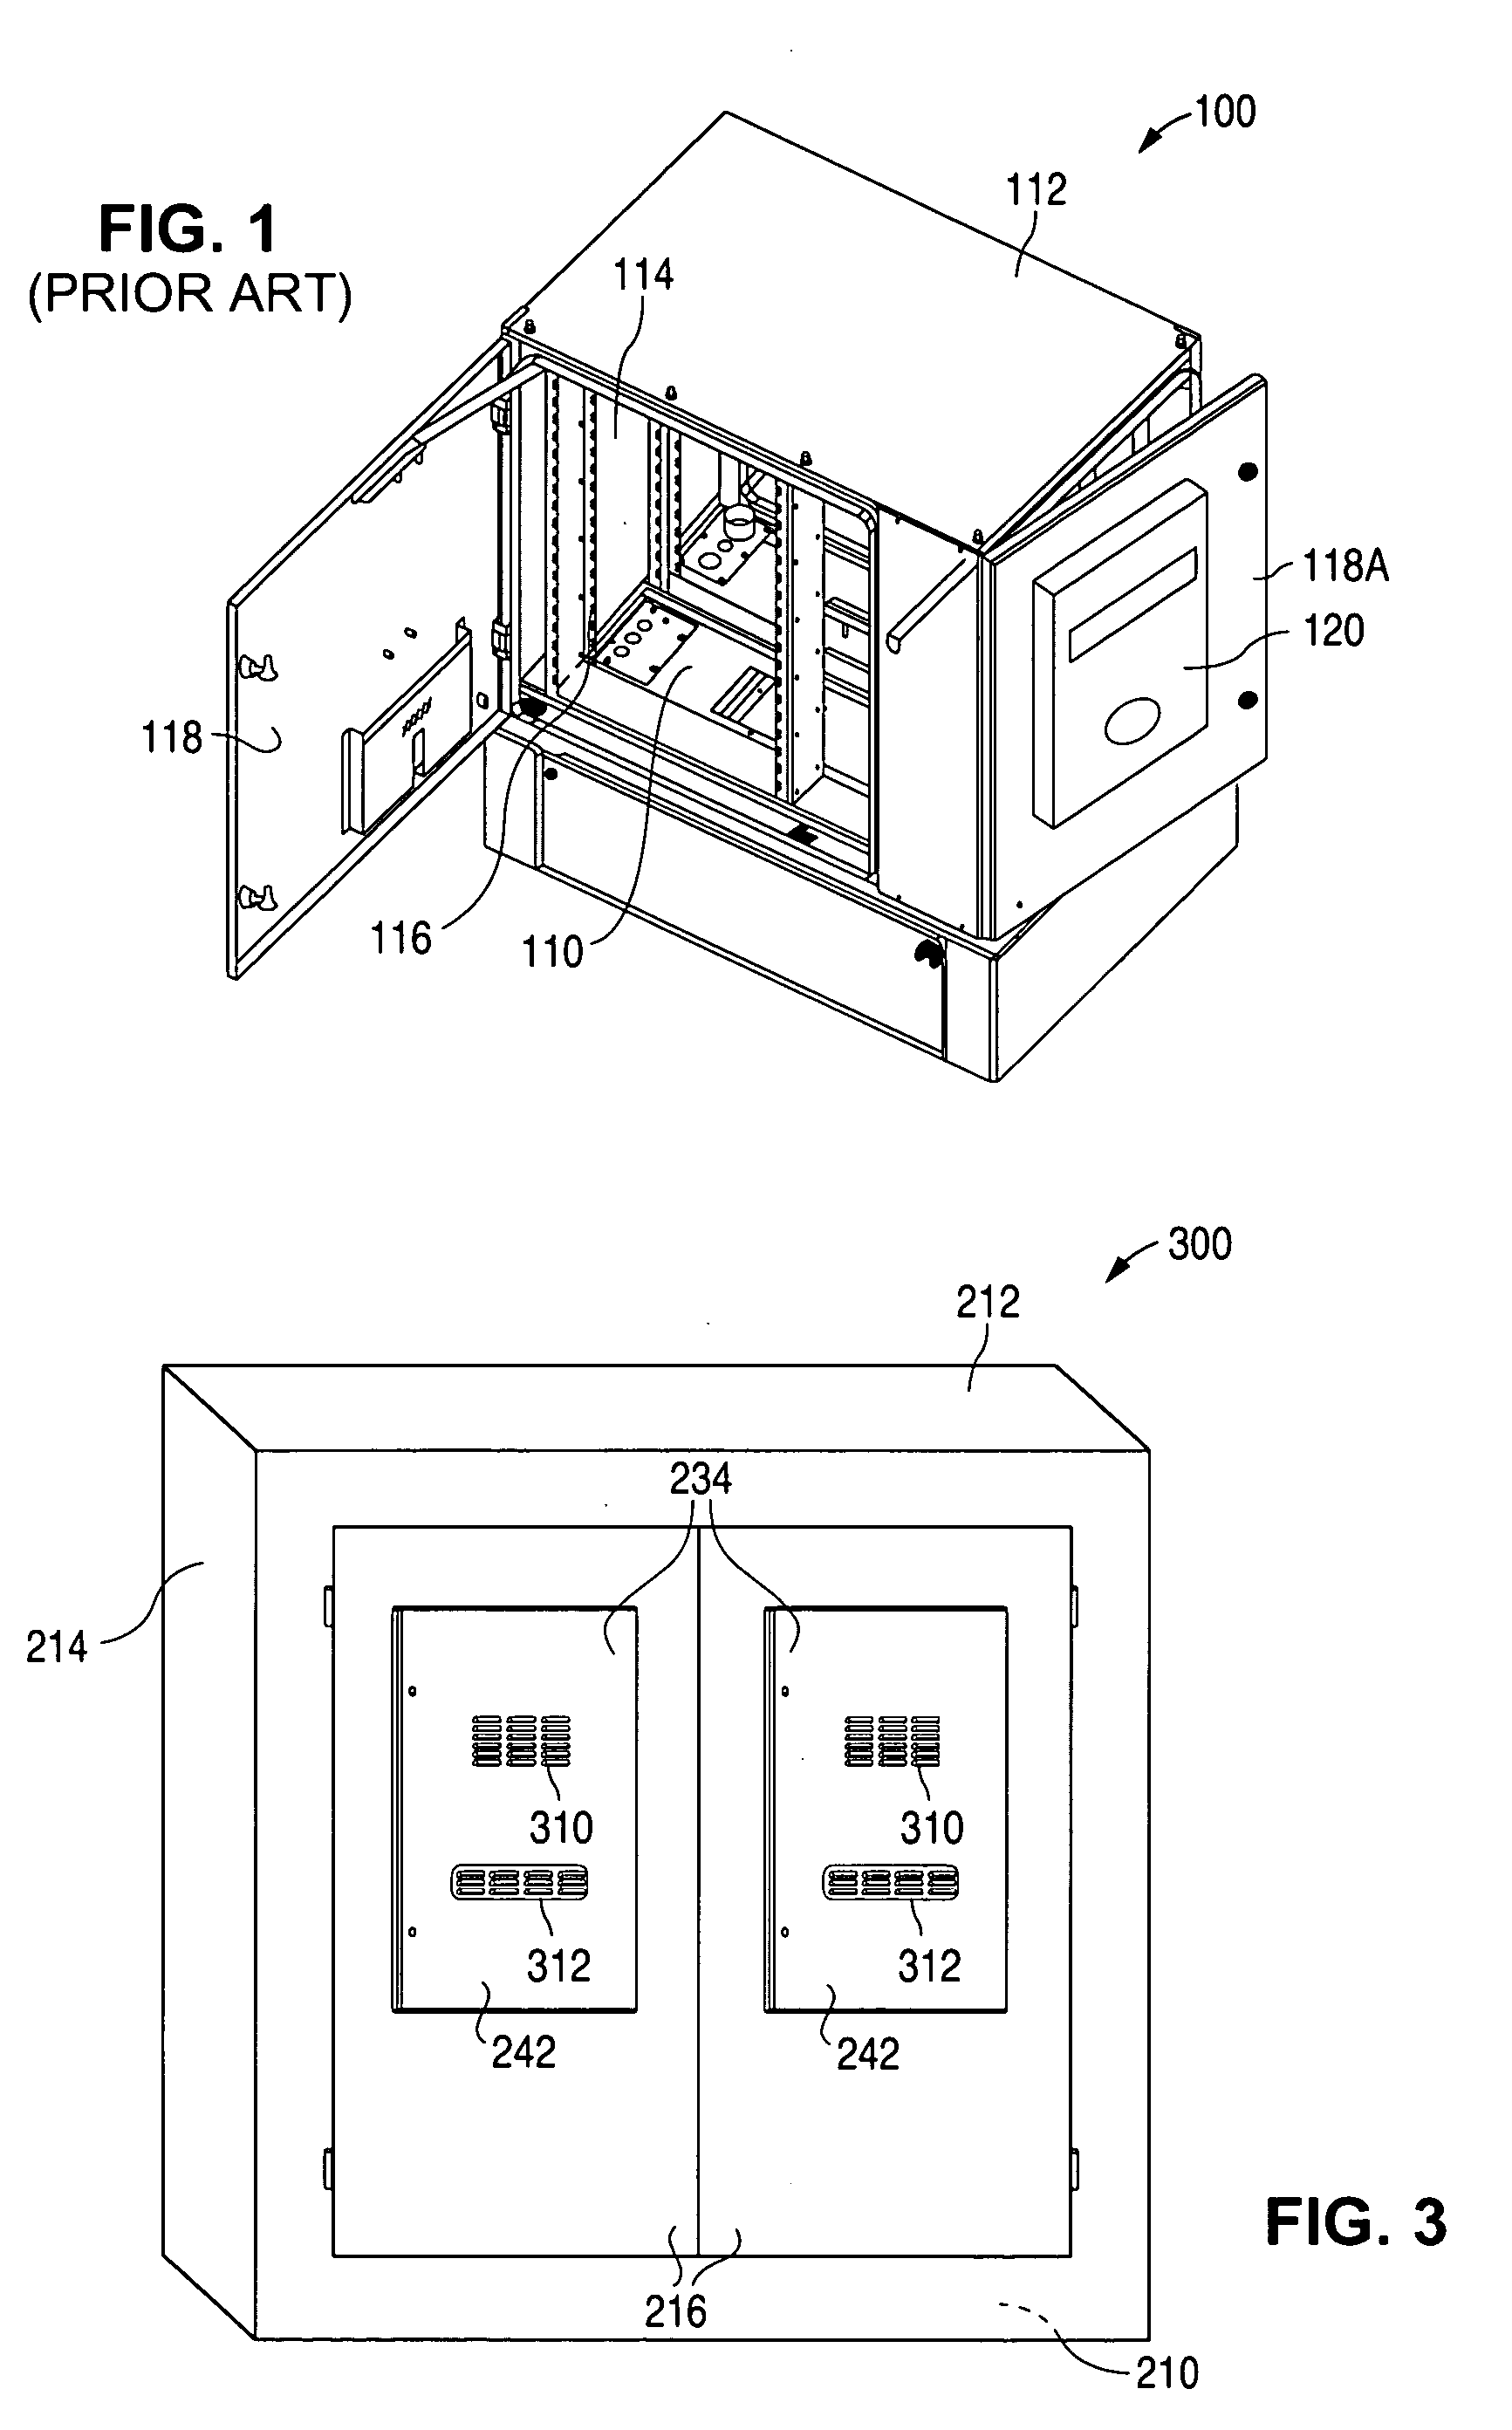 Electronics cabinet with an air-to-air heat exchanger mounted to the outside of the cabinet